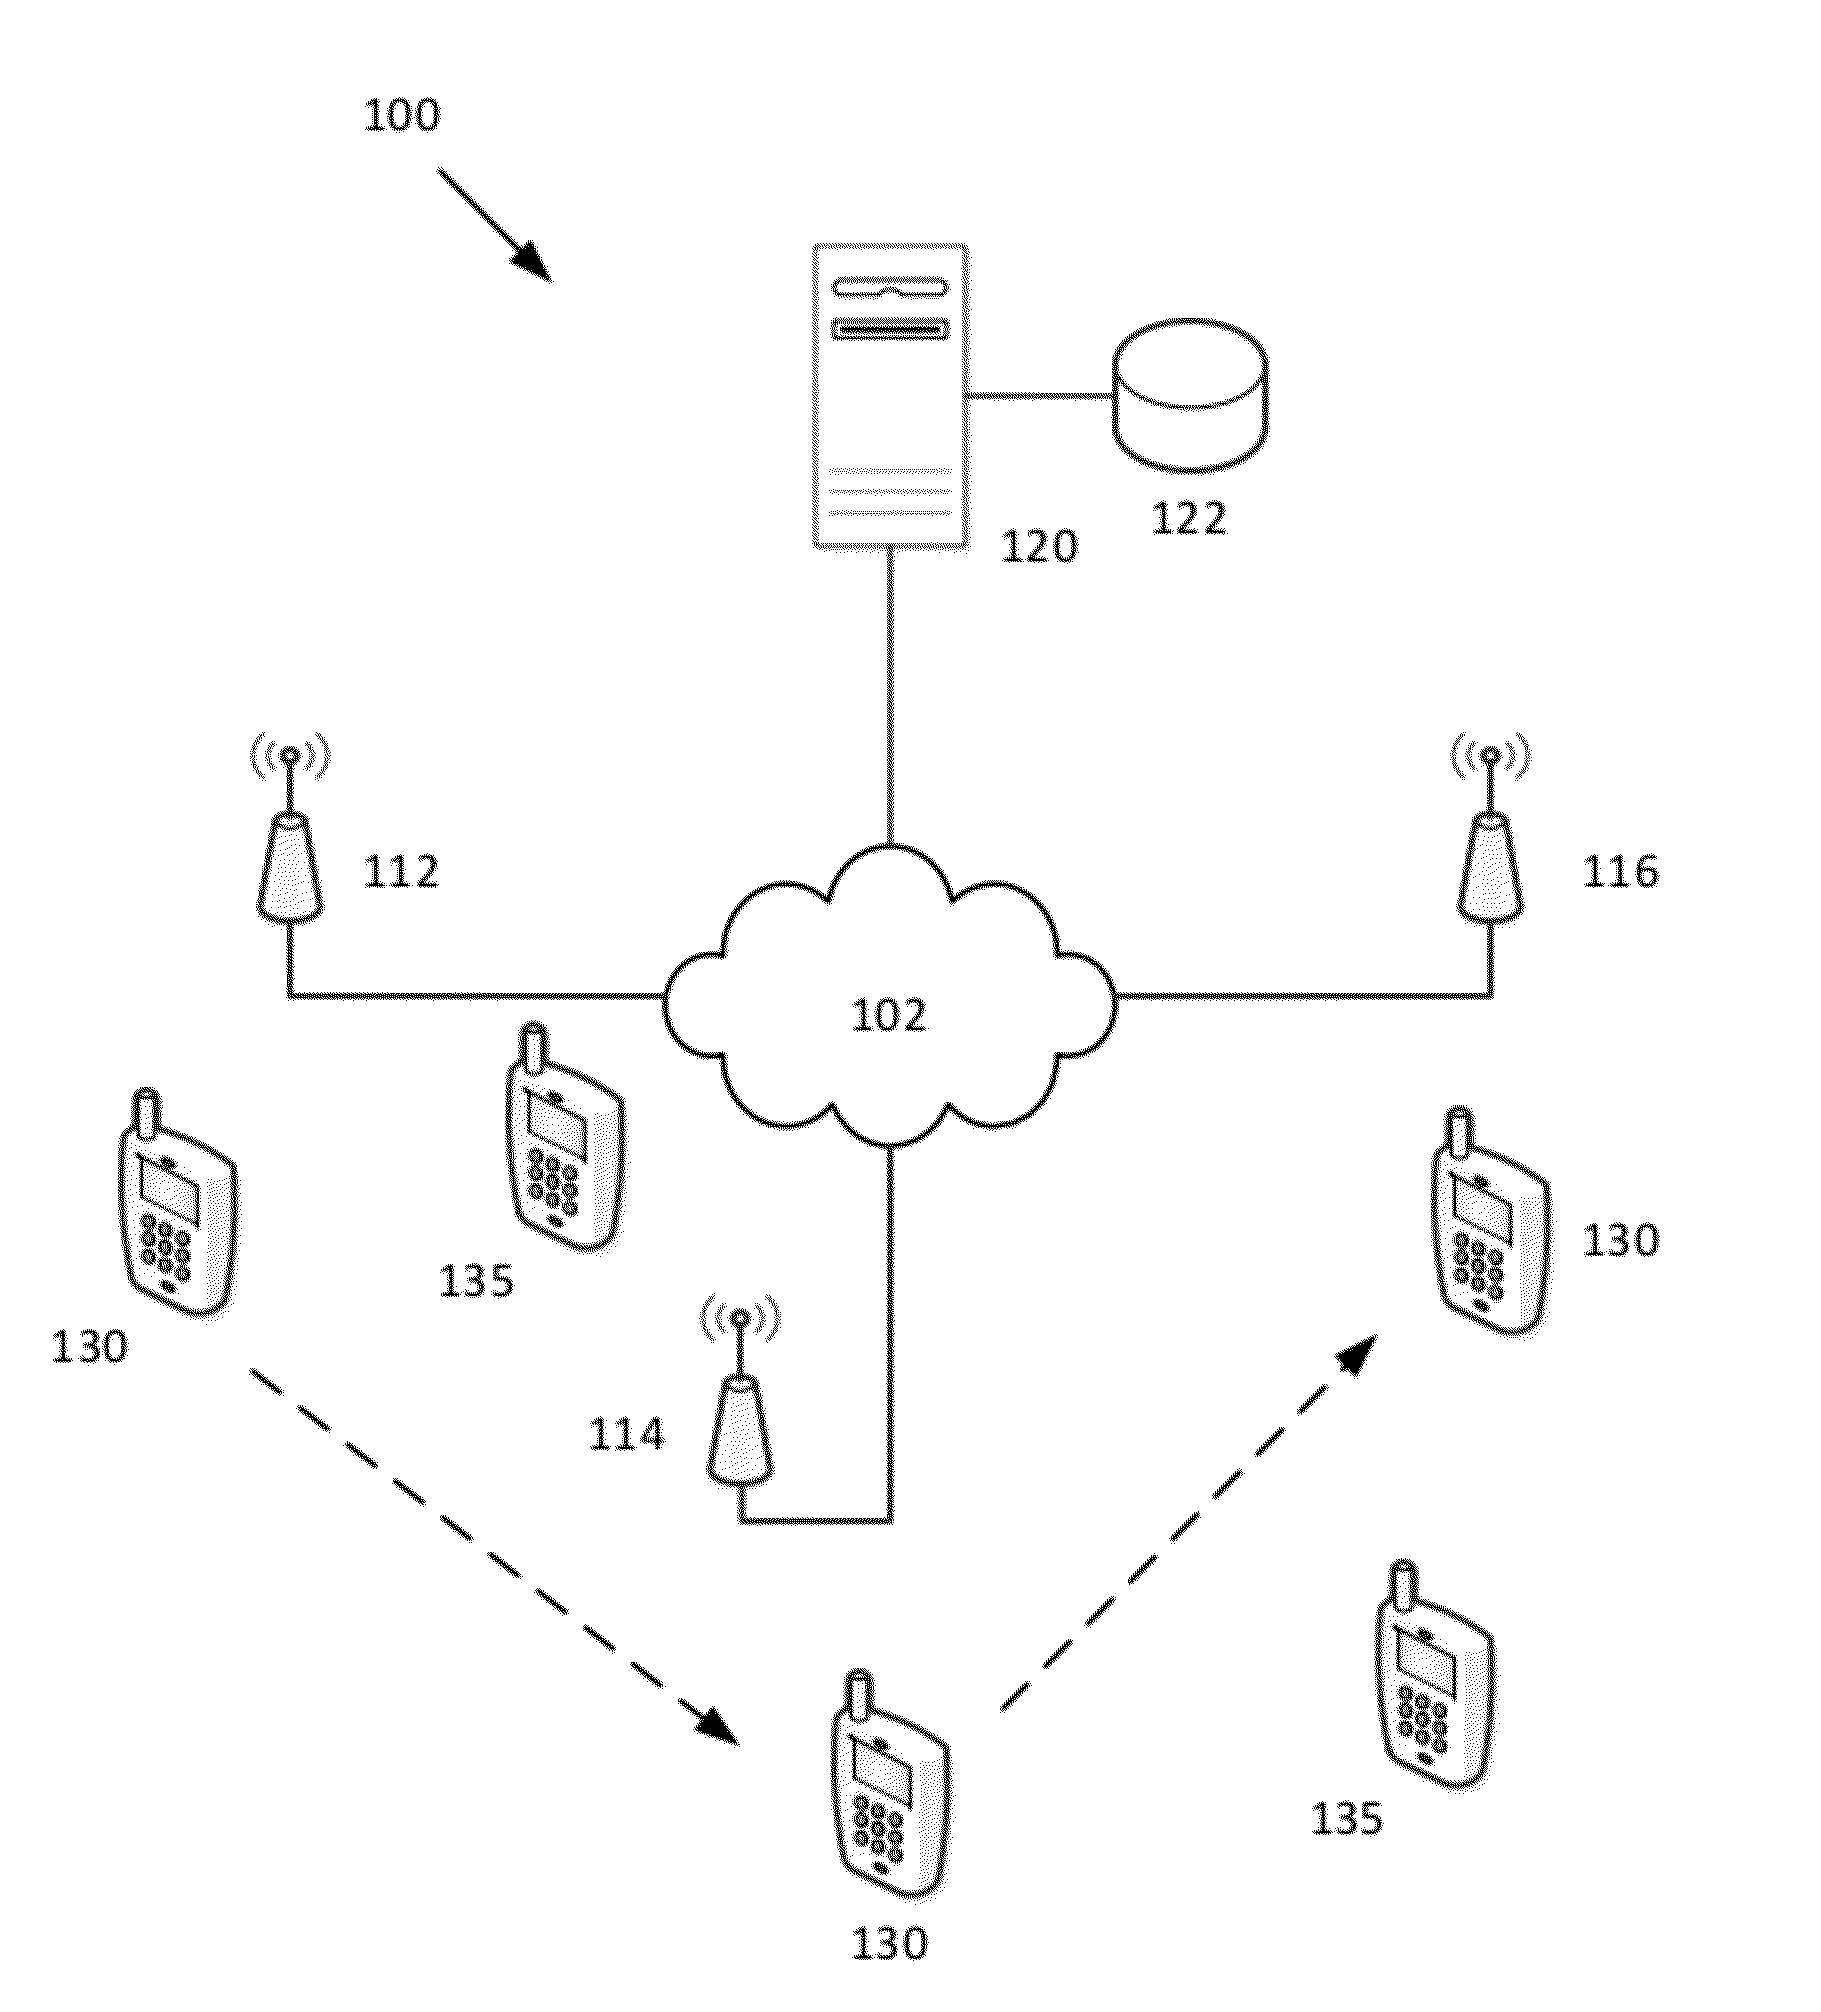 Method and System for Selecting A Wireless Network